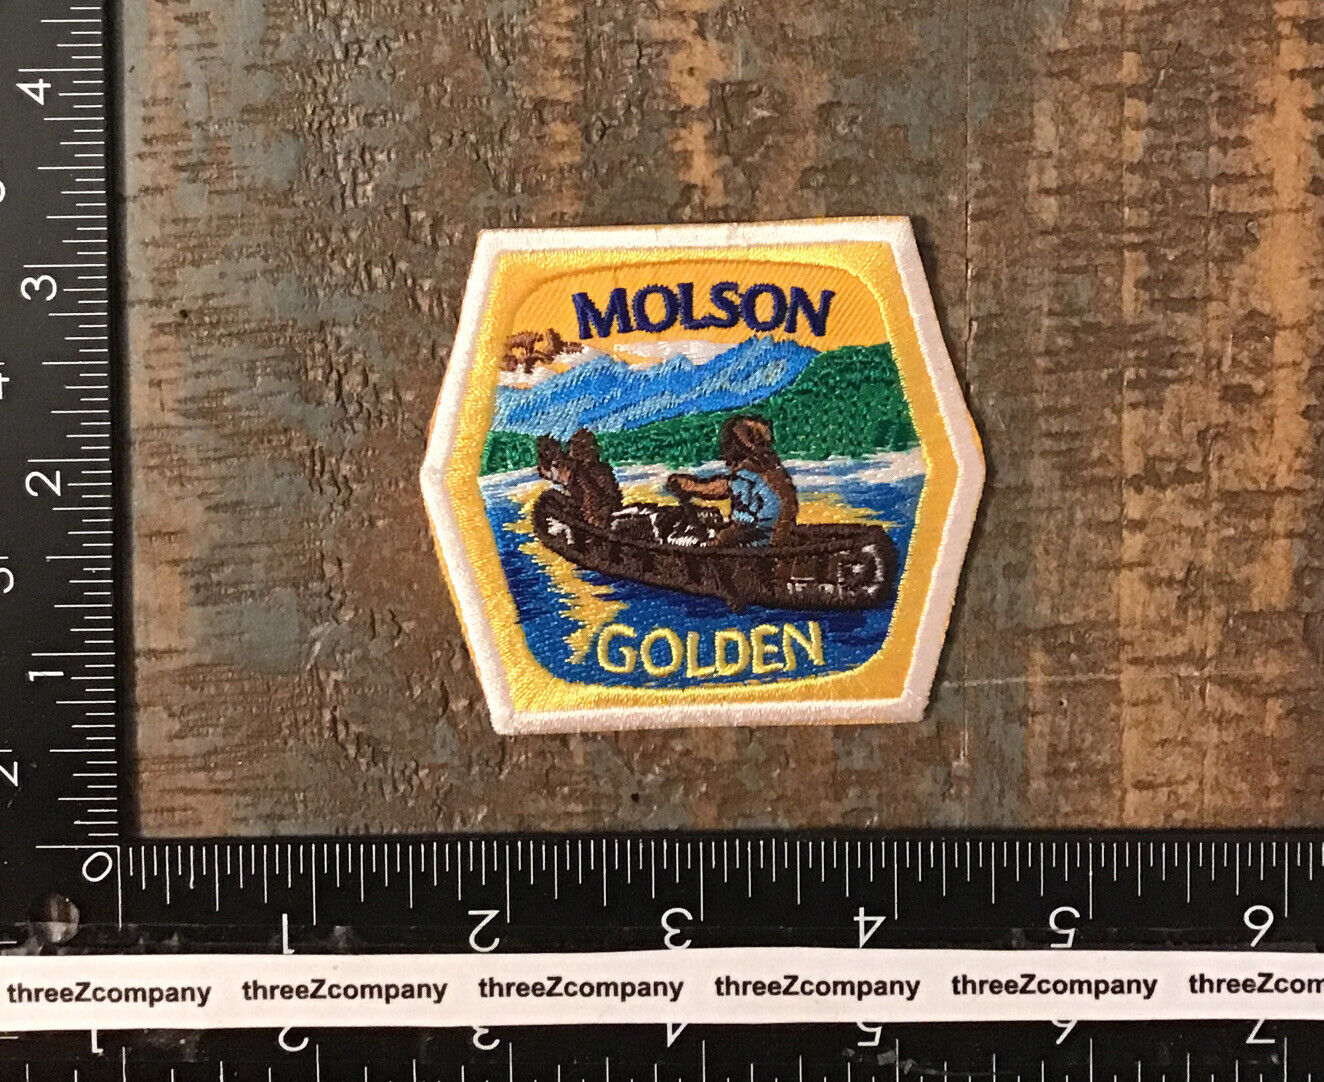 MOLSON GOLDEN Beer Brewing Company Logo Iron-On Patch